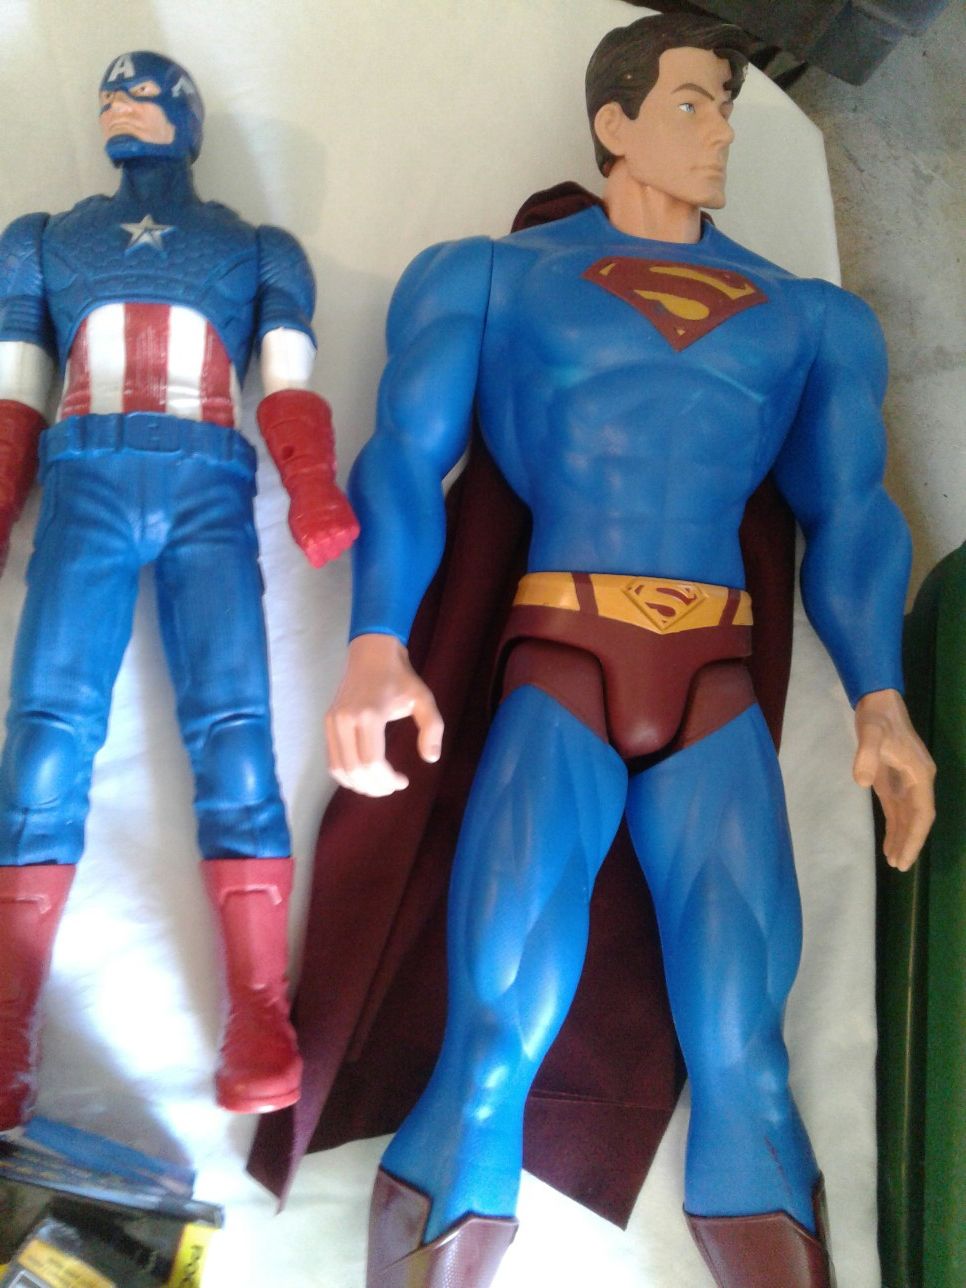 Superman and Captain America figures $35